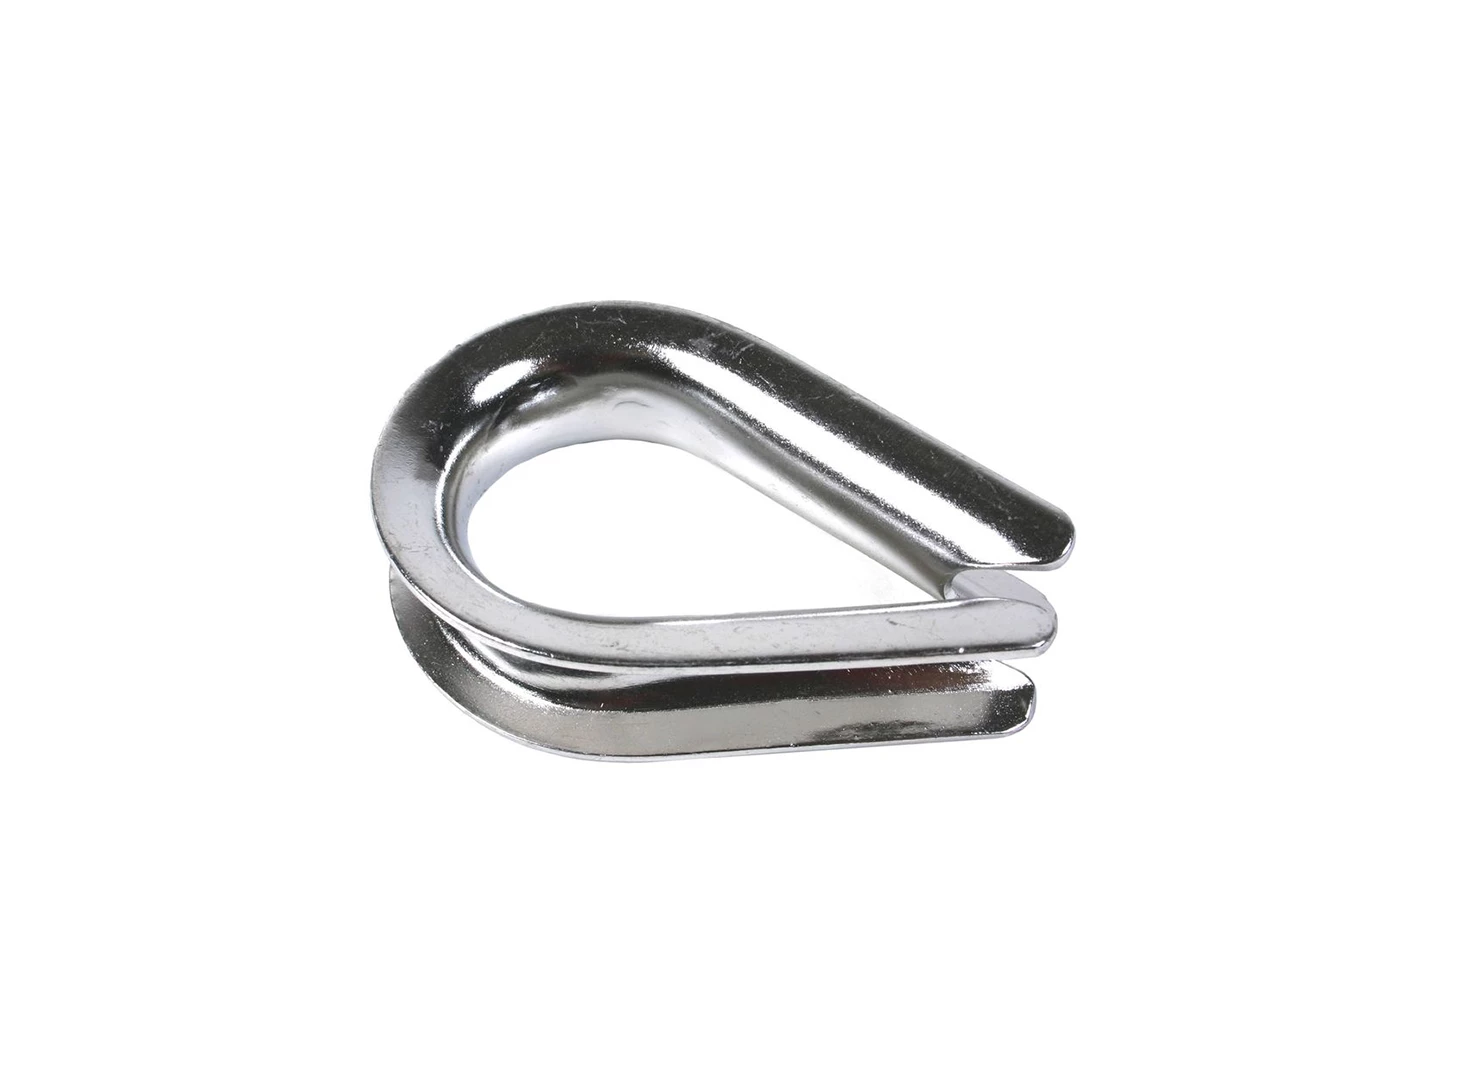 Product: Thimble 28mm